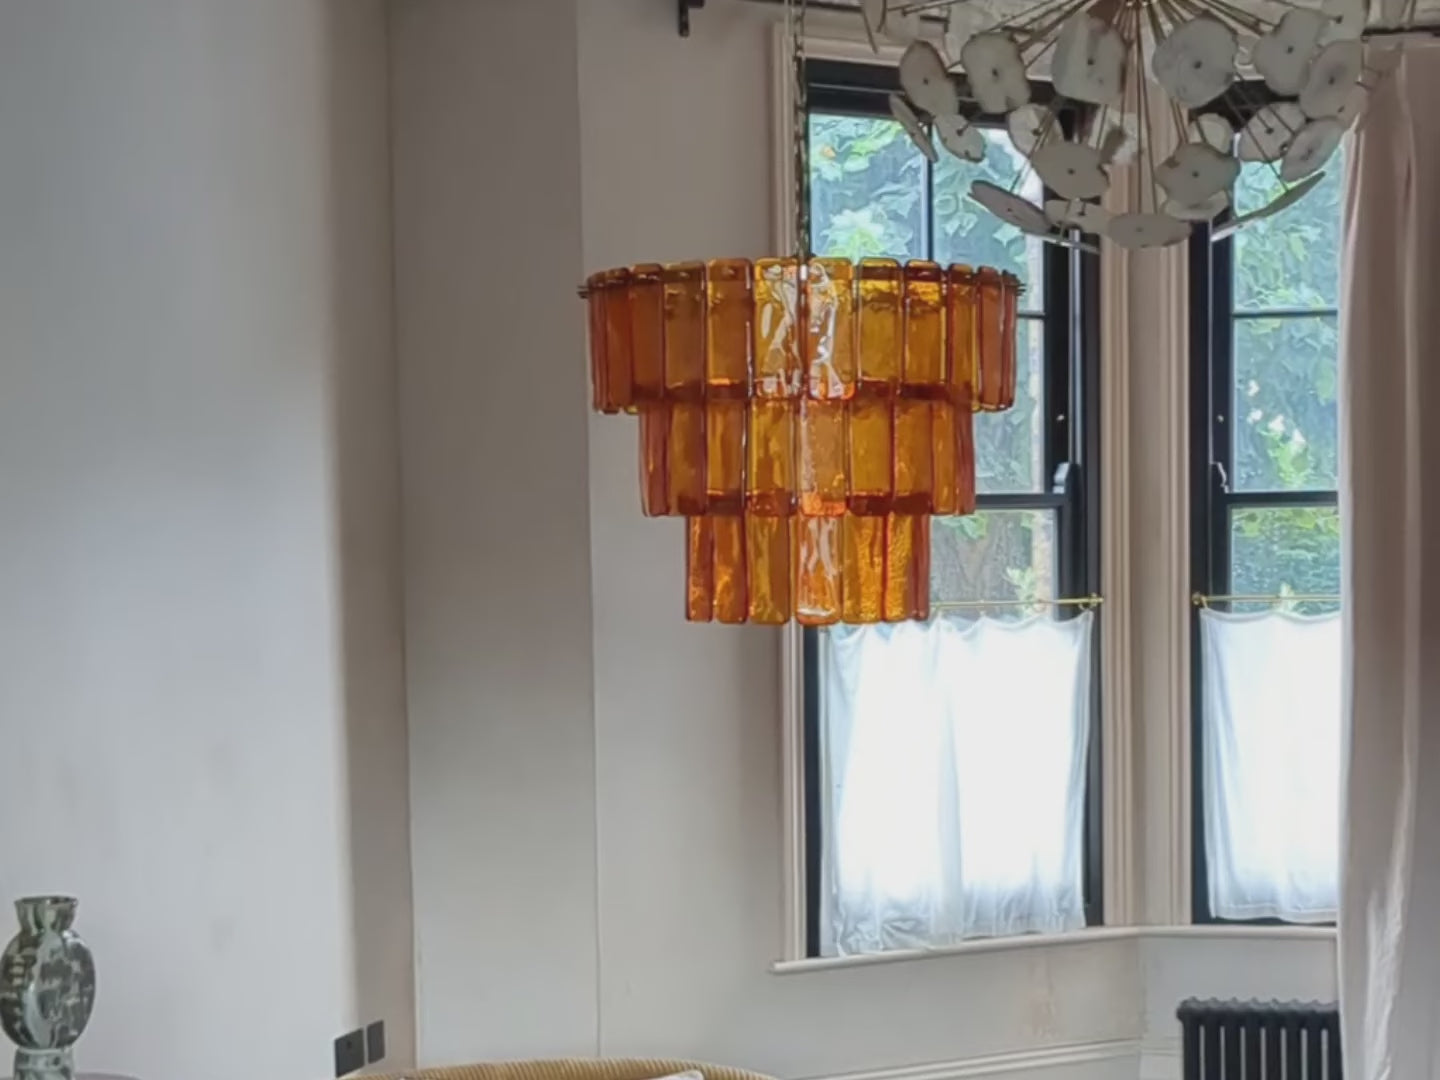 66 amber-coloured glass pieces that are oblong-shaped are mounted on 3 tiered, brass arms.